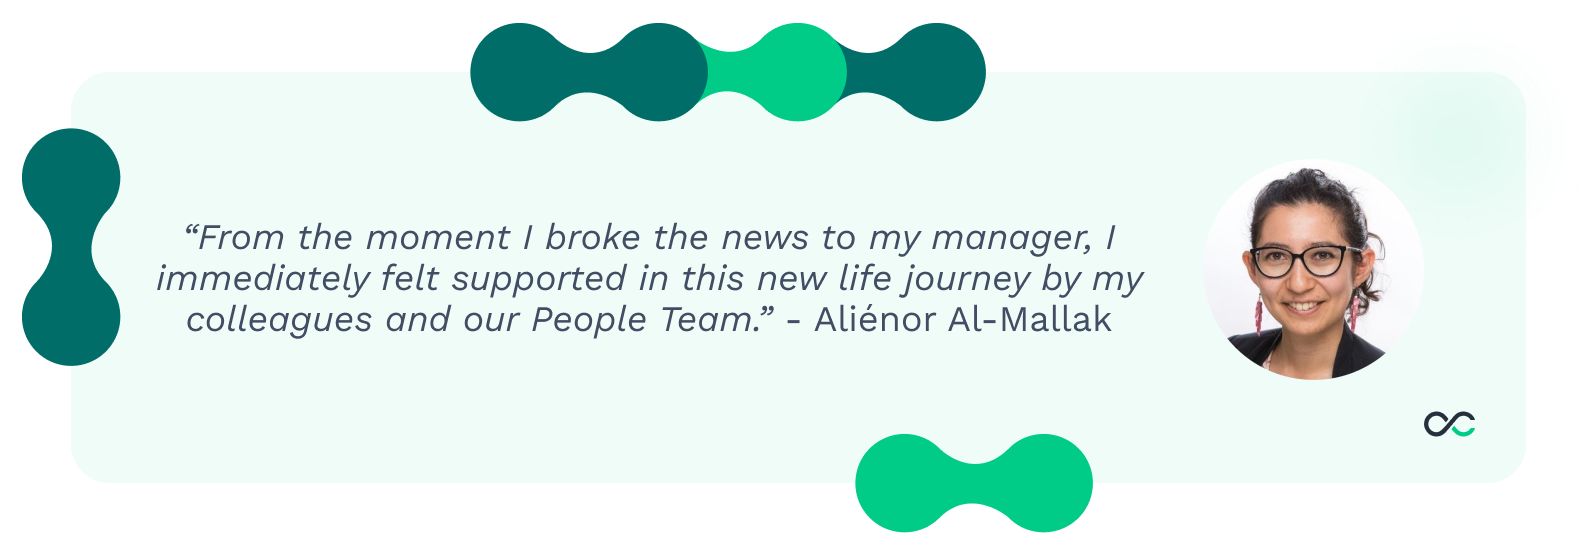 Swapcard_Navigating Parenthood As a Remote Worker_Alienor Quote